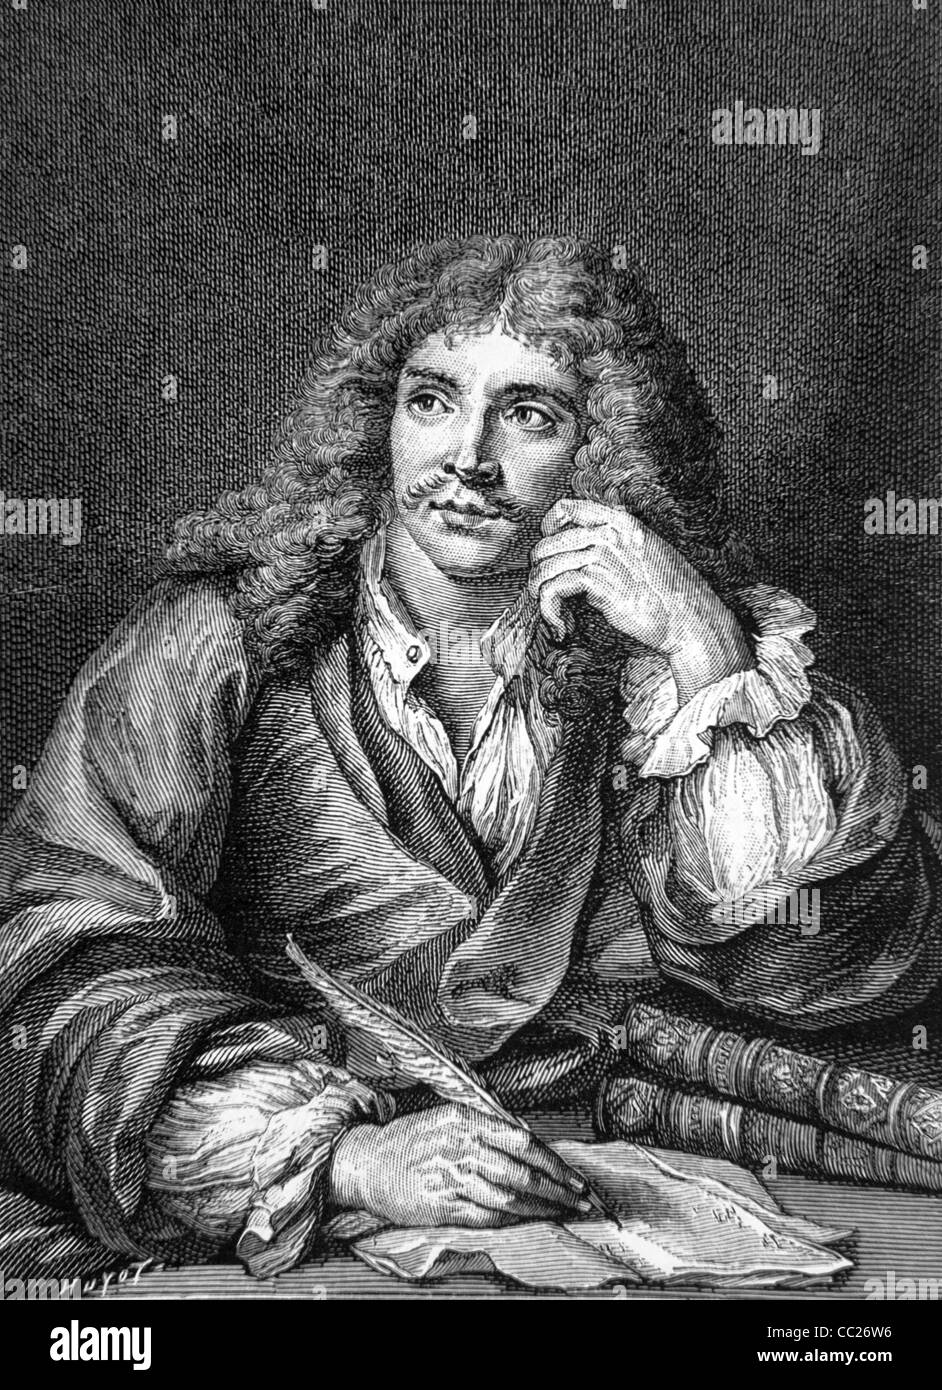 Portrait of Molière, Jean-Baptiste Poquelin de (1622-73) French Dramatist & Writer Writing with Quill Pen. Portrait Engraving by Lépicé  of Painting by C. Coypel. Stock Photo